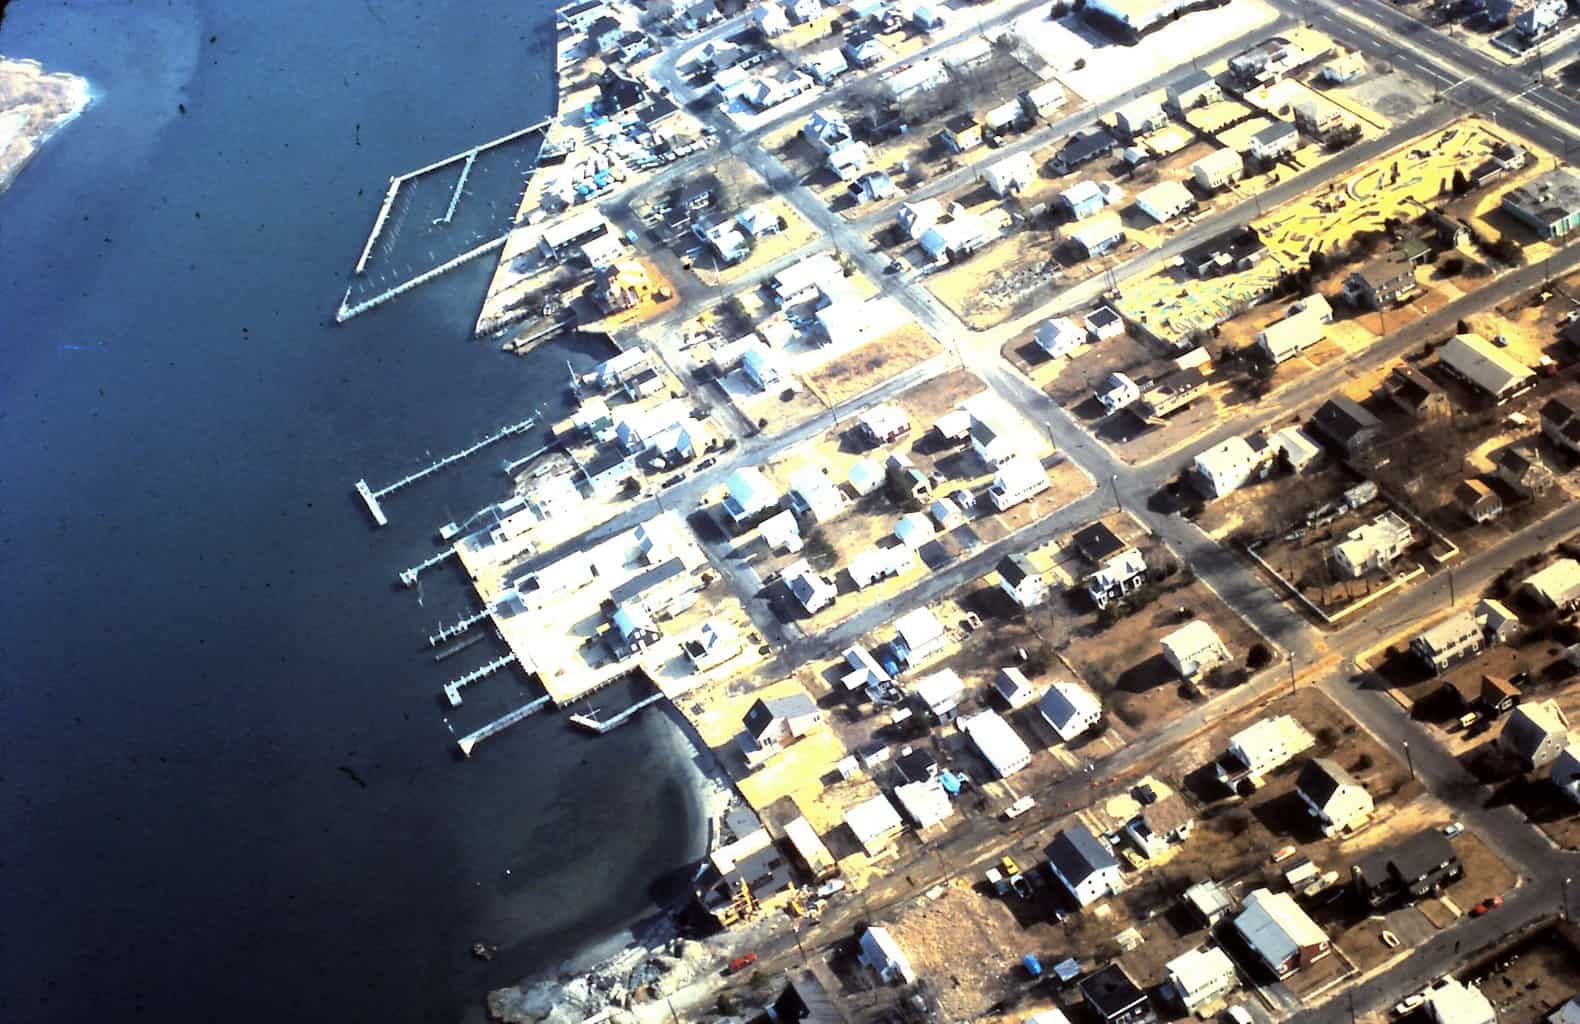 Aerial view of North Beach Haven, possibly 1980's